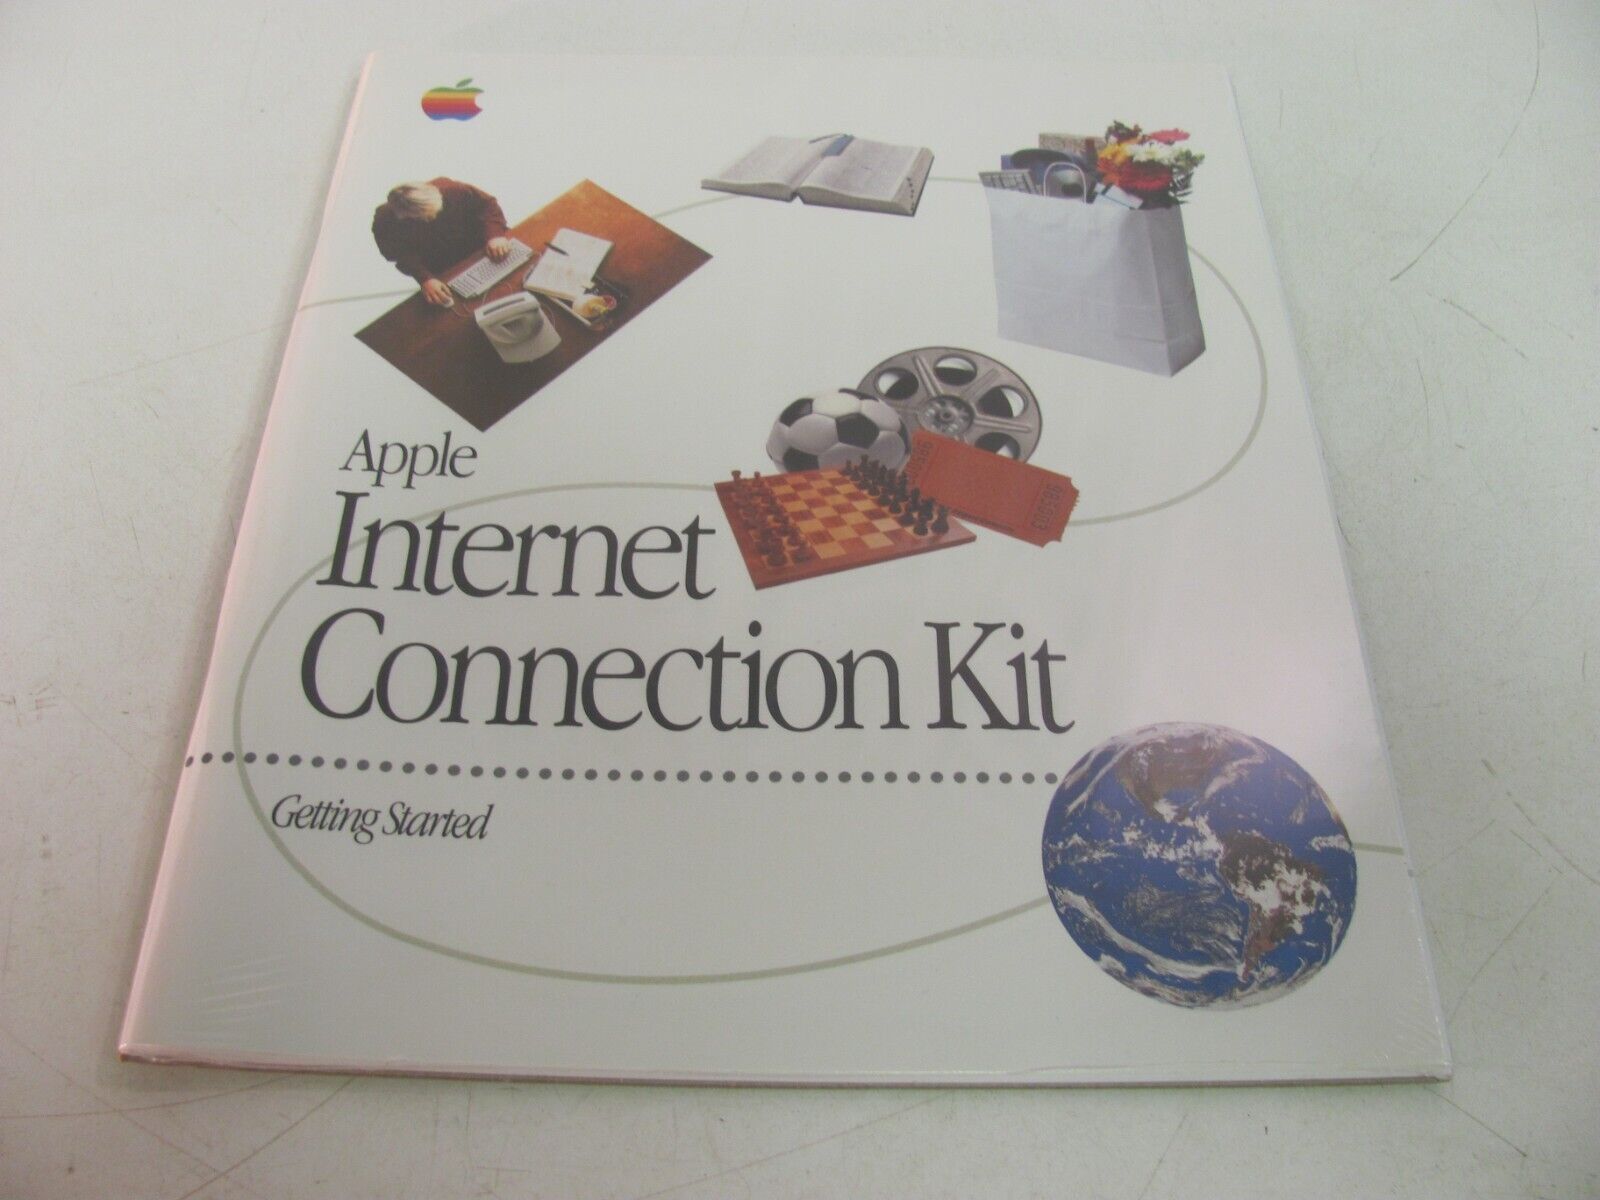 NEW Vintage Apple Internet Connection Kit 'Getting Started' 600-5122 034-0039A